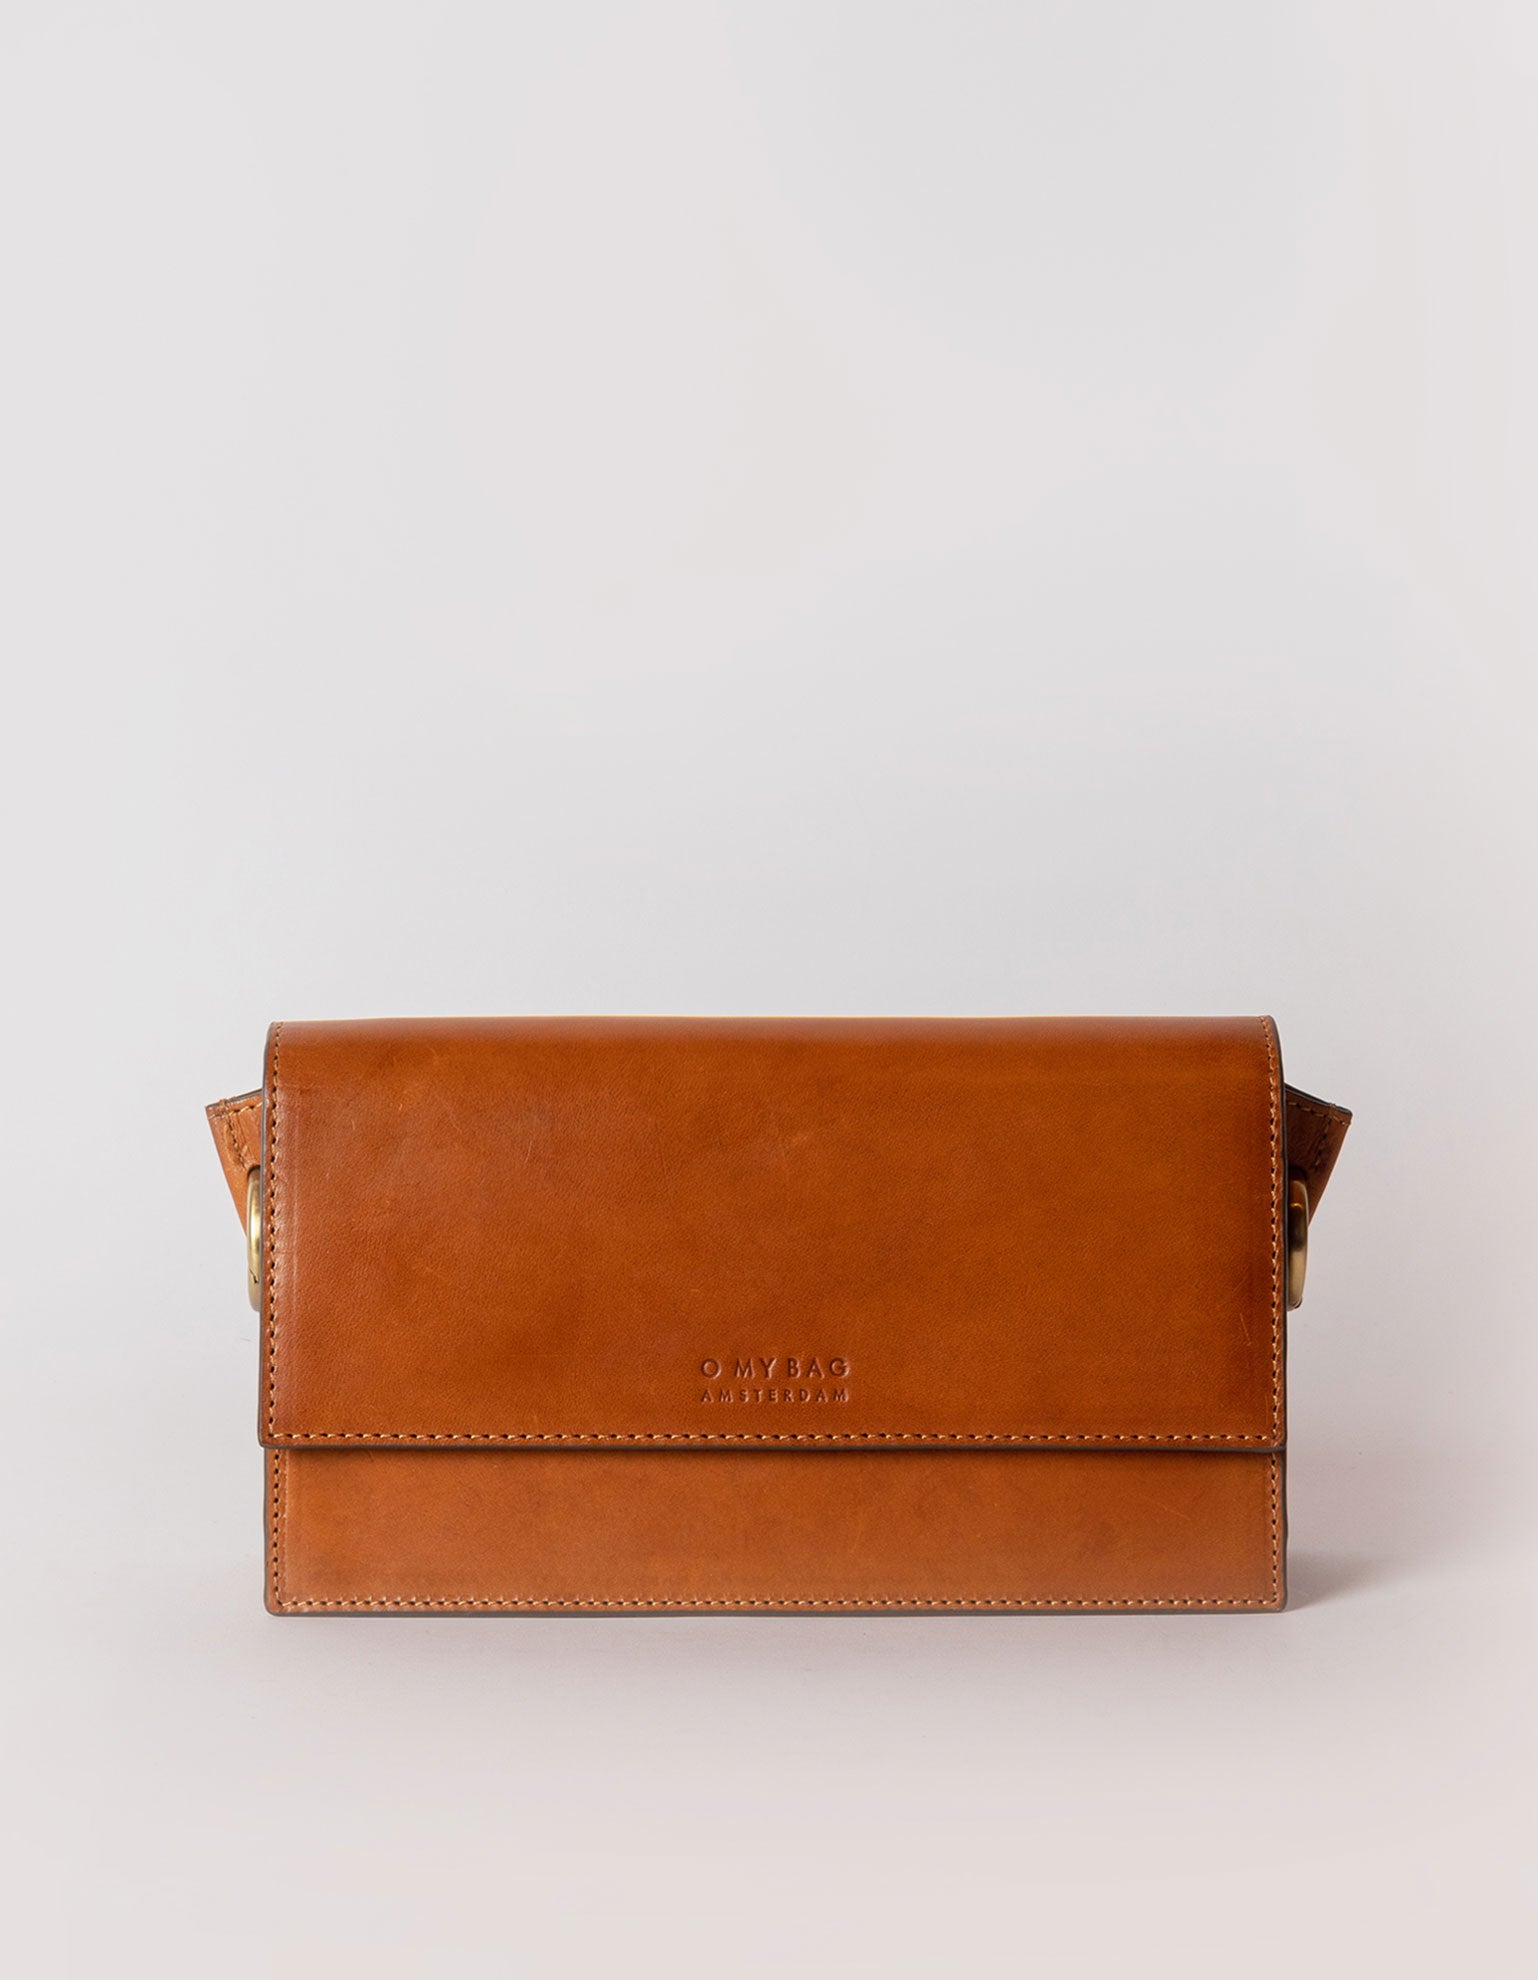 Stella in cognac classic leather without strap. Front product image.